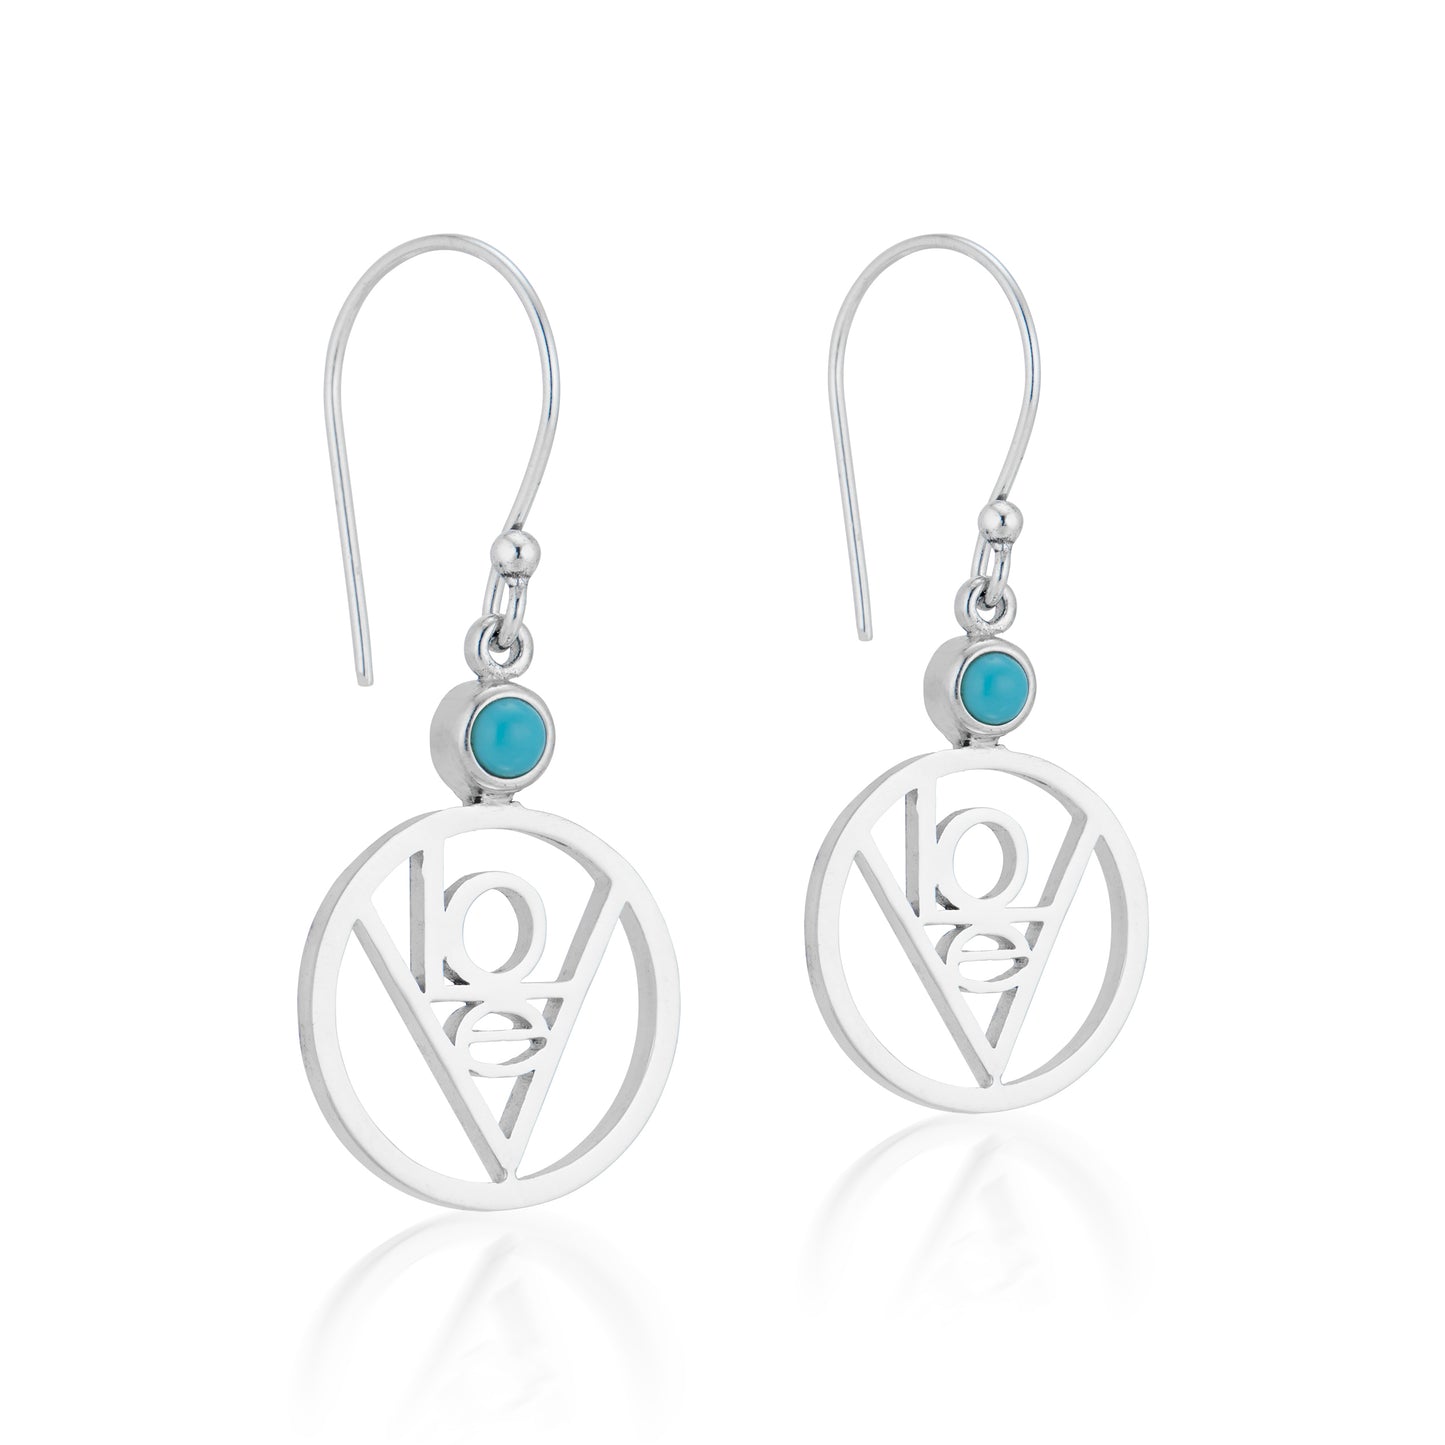 LoVe Earrings With Turquoise